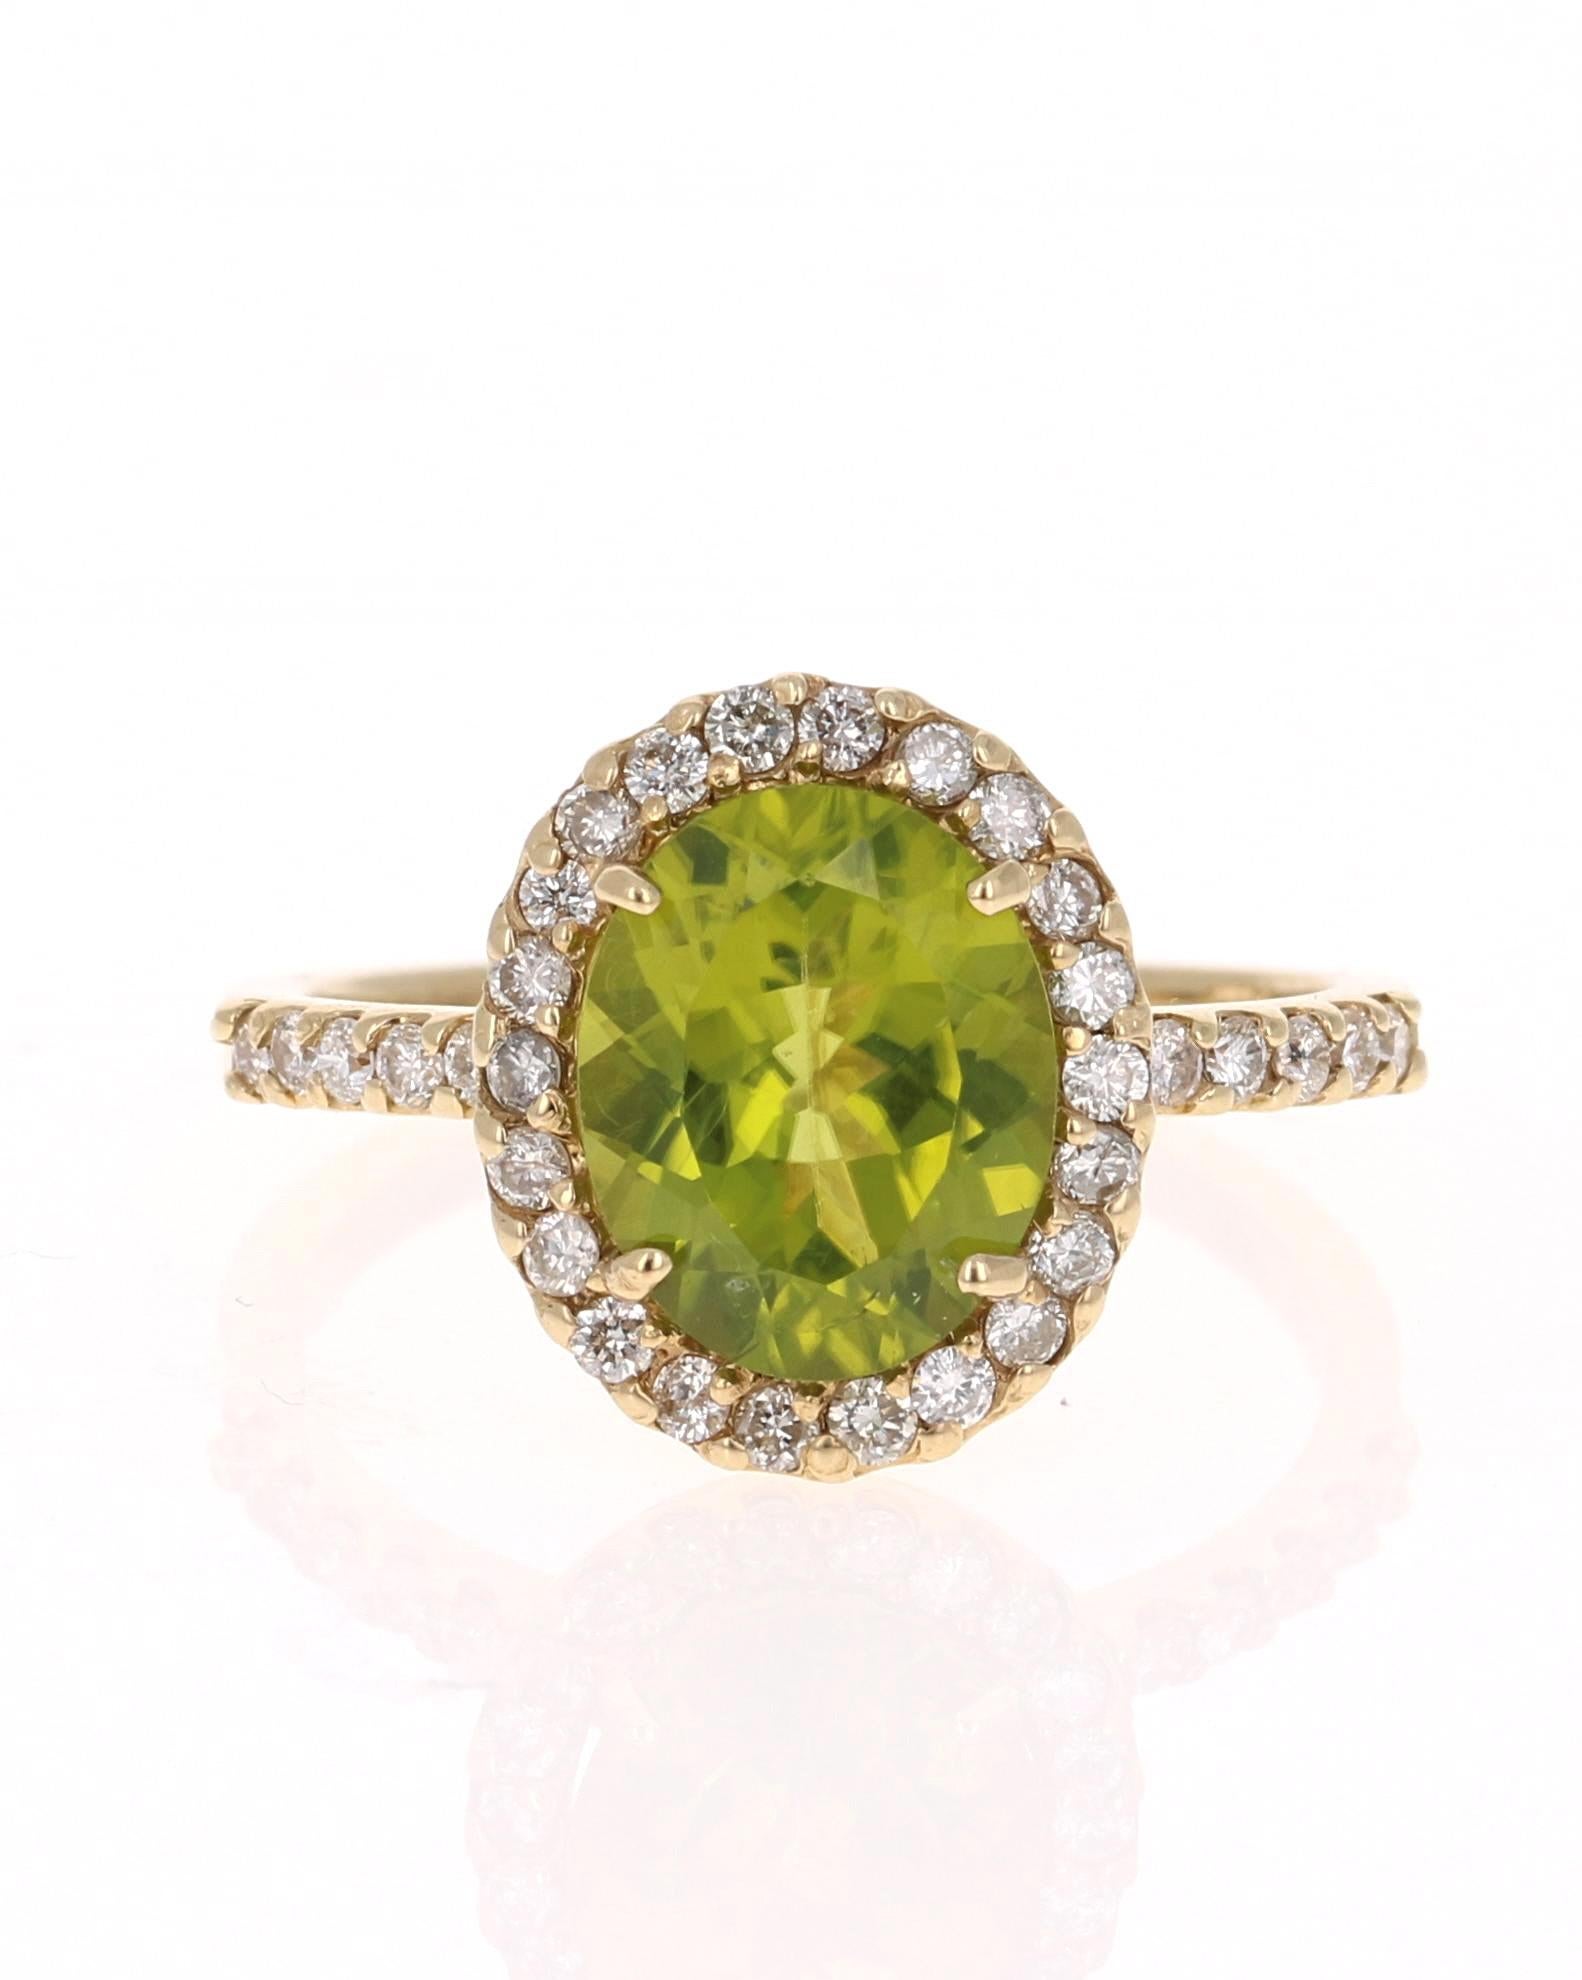 This beauty has a large Oval Cut Peridot that weighs 2.49 Carats and is surrounded by a halo of 34 Round Cut Diamonds that weigh 0.46 Carats. The total carat weight of this ring is 2.95 carats  

The ring is casted in 14K Yellow Gold and weighs